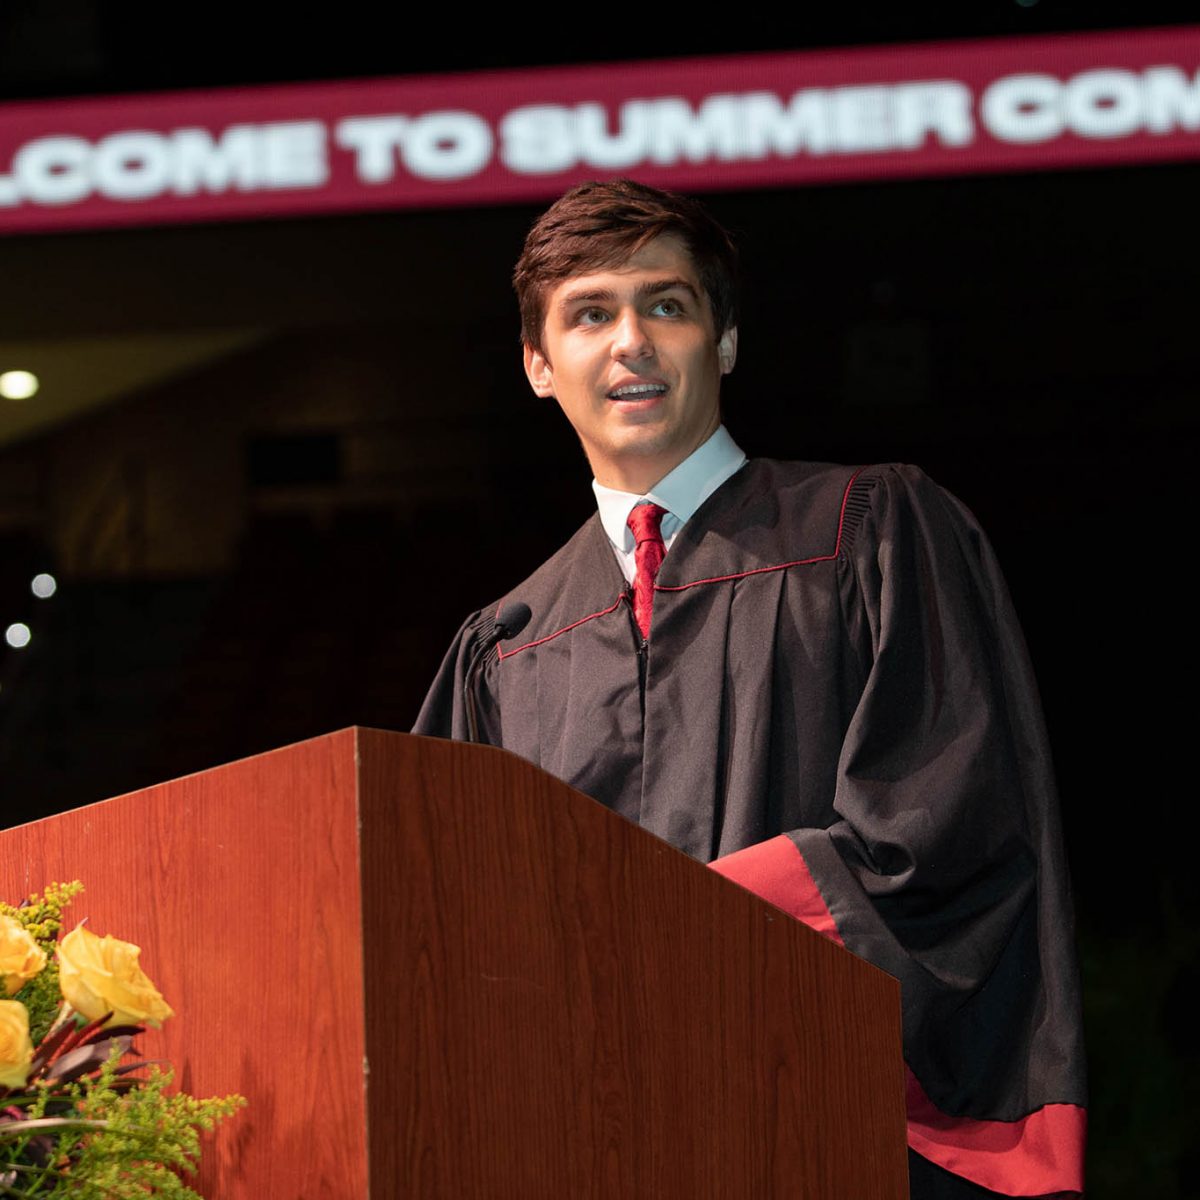 Student Body President Jack Hitchcock welcomes graduates and guests at the summer commencement ceremony Friday, Aug. 4 at the Donald L. Tucker Civic Center. (FSU Photography Services)